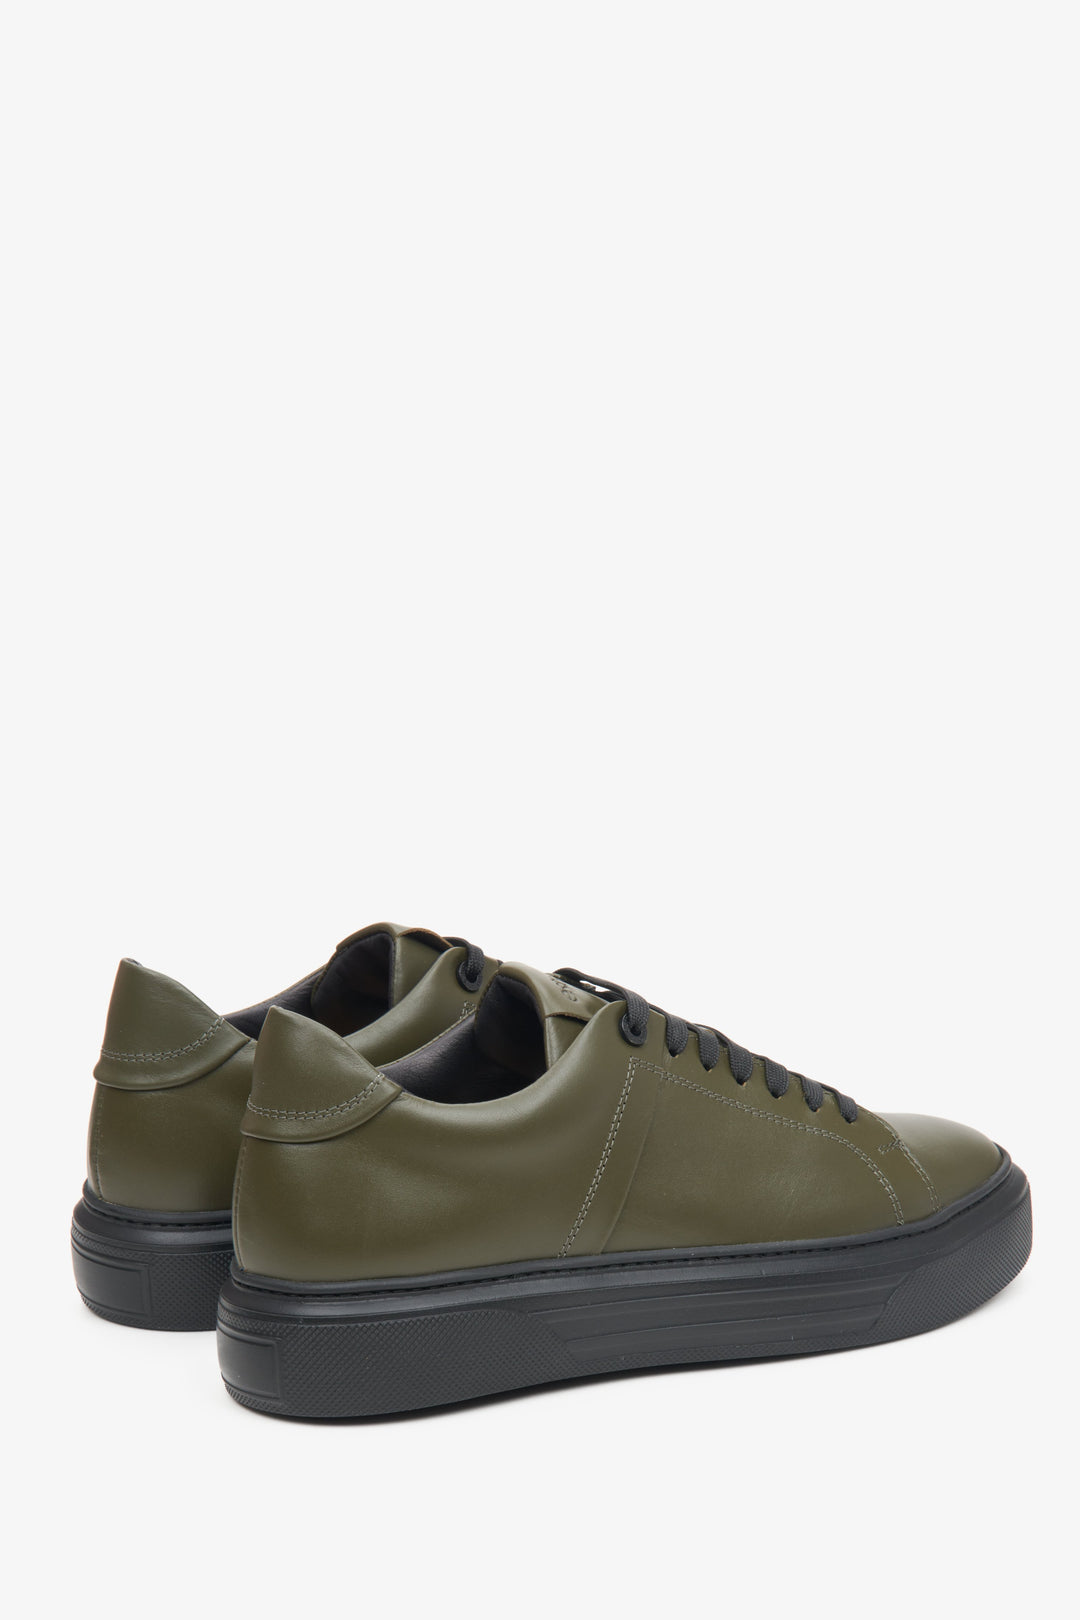 Khaki Estro men's sneakers - close-up of the side seam and hee.